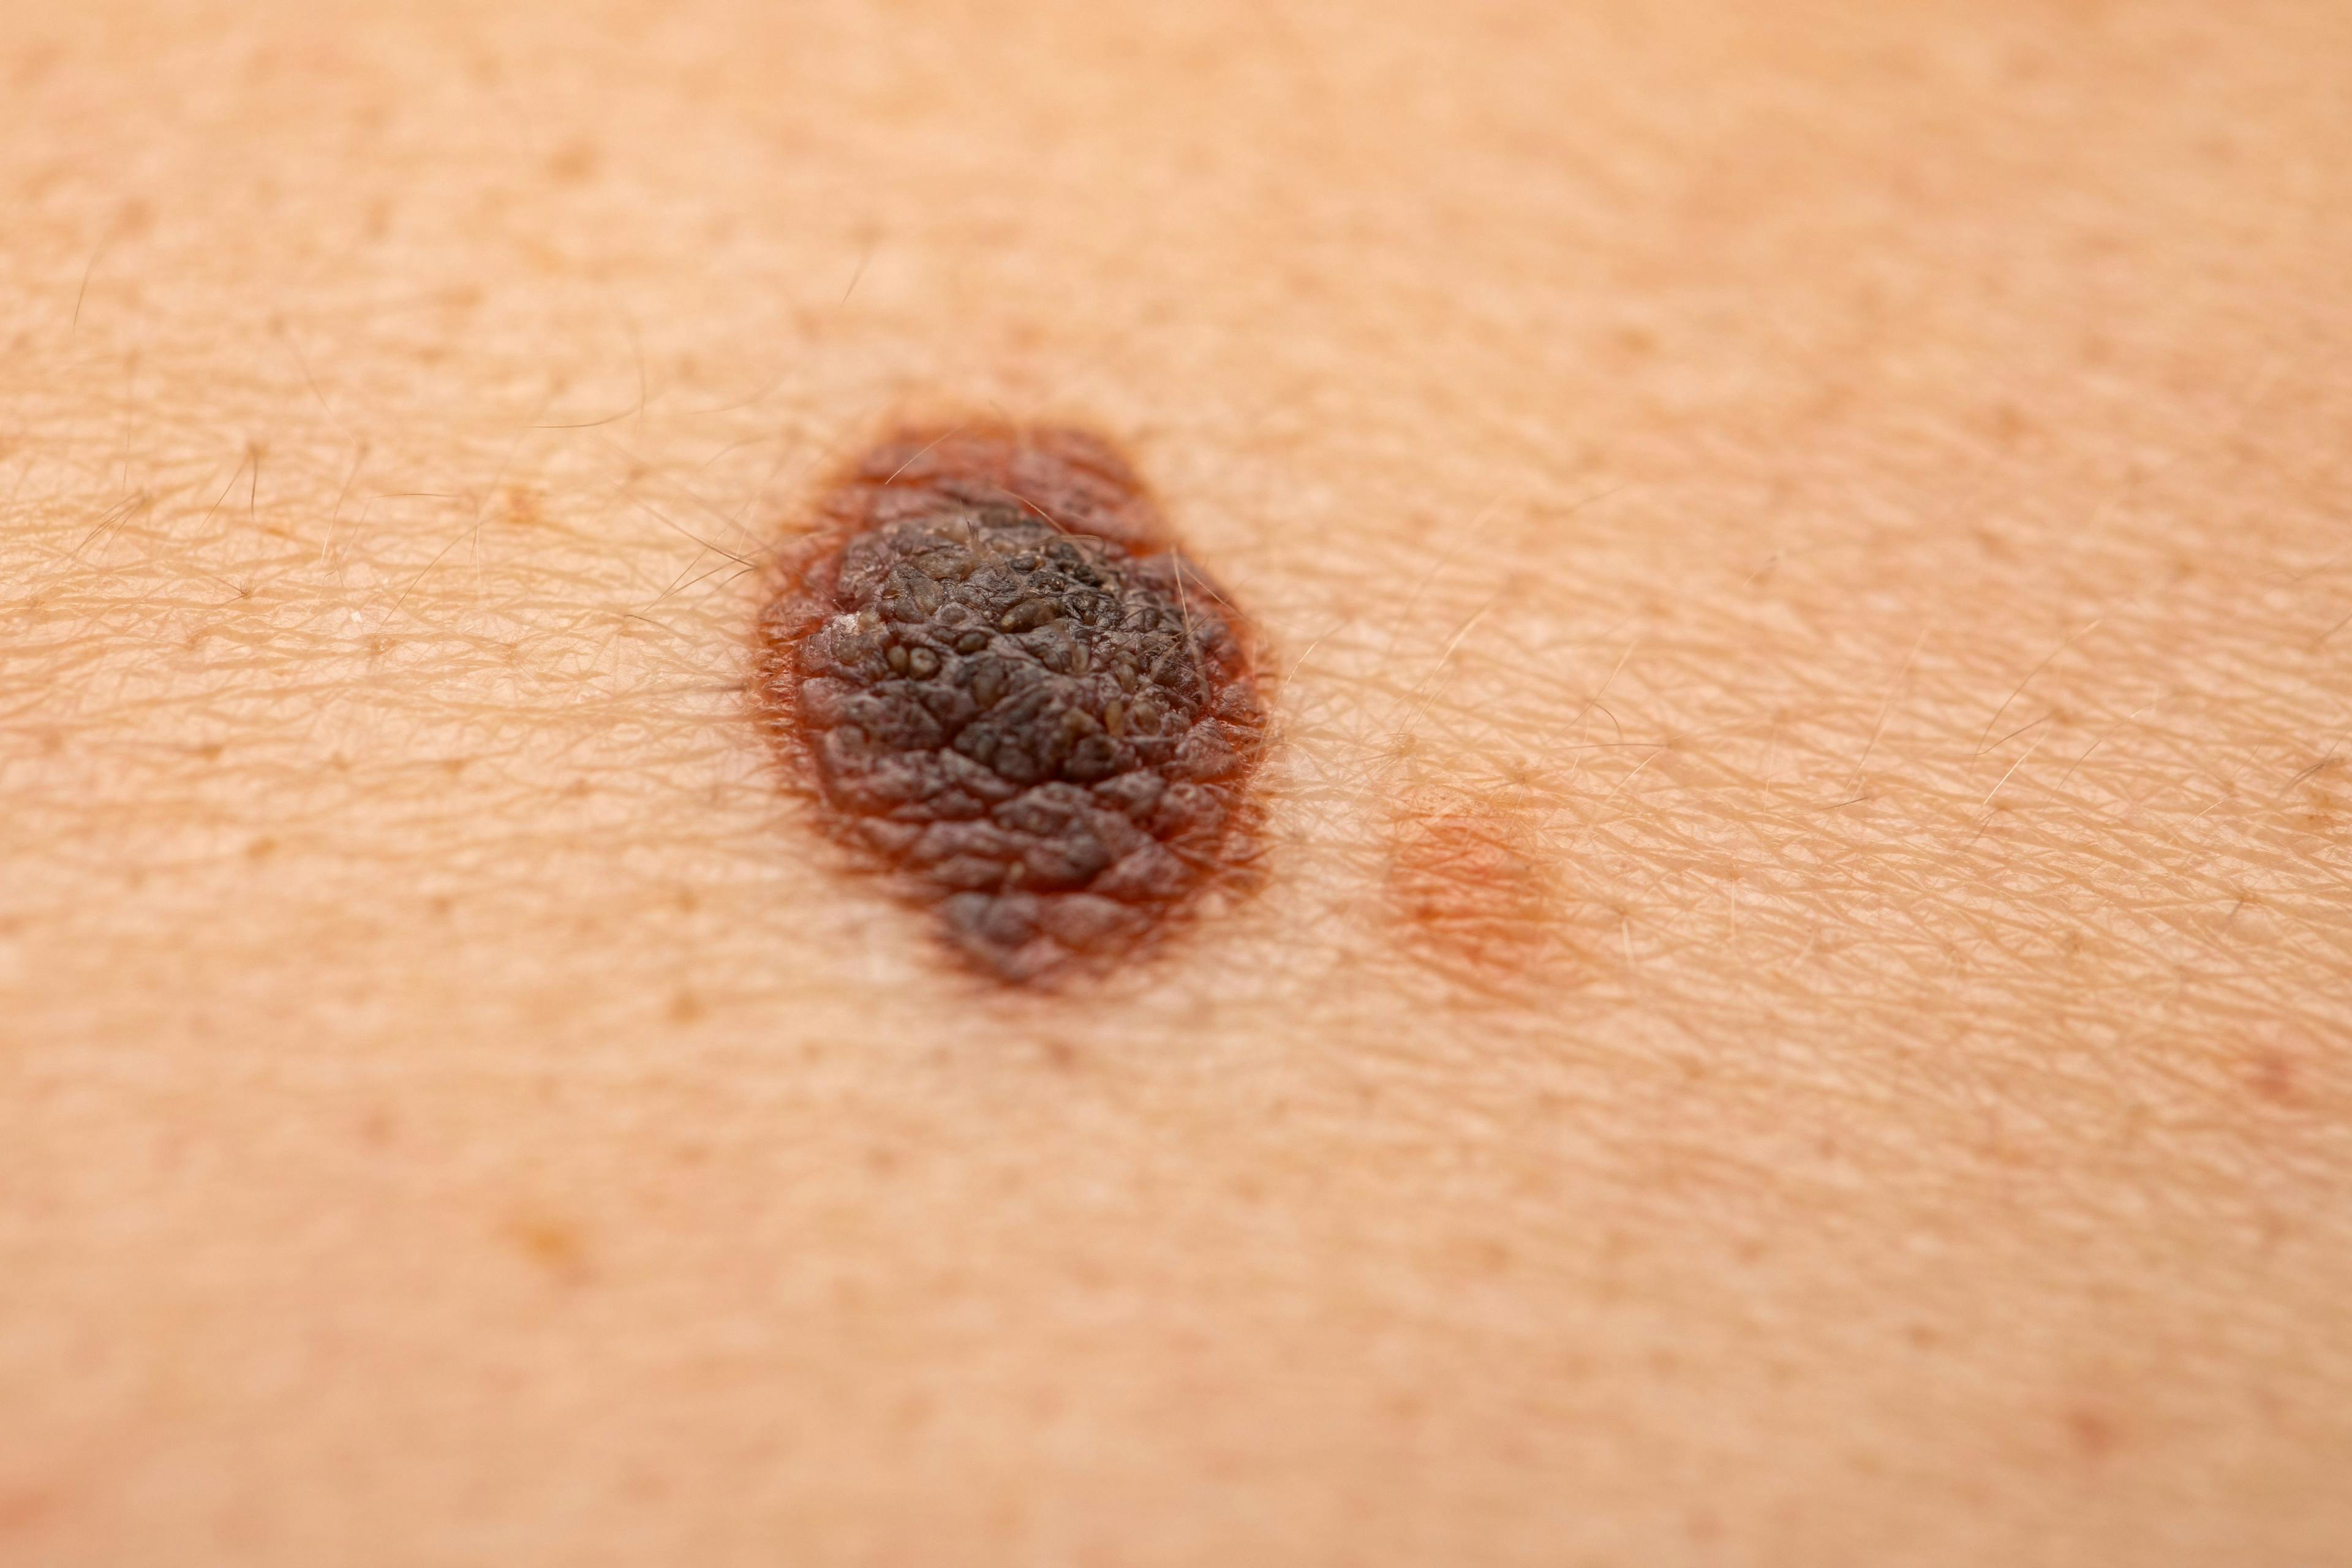 Advances in Skin Cancer Diagnosis and Education